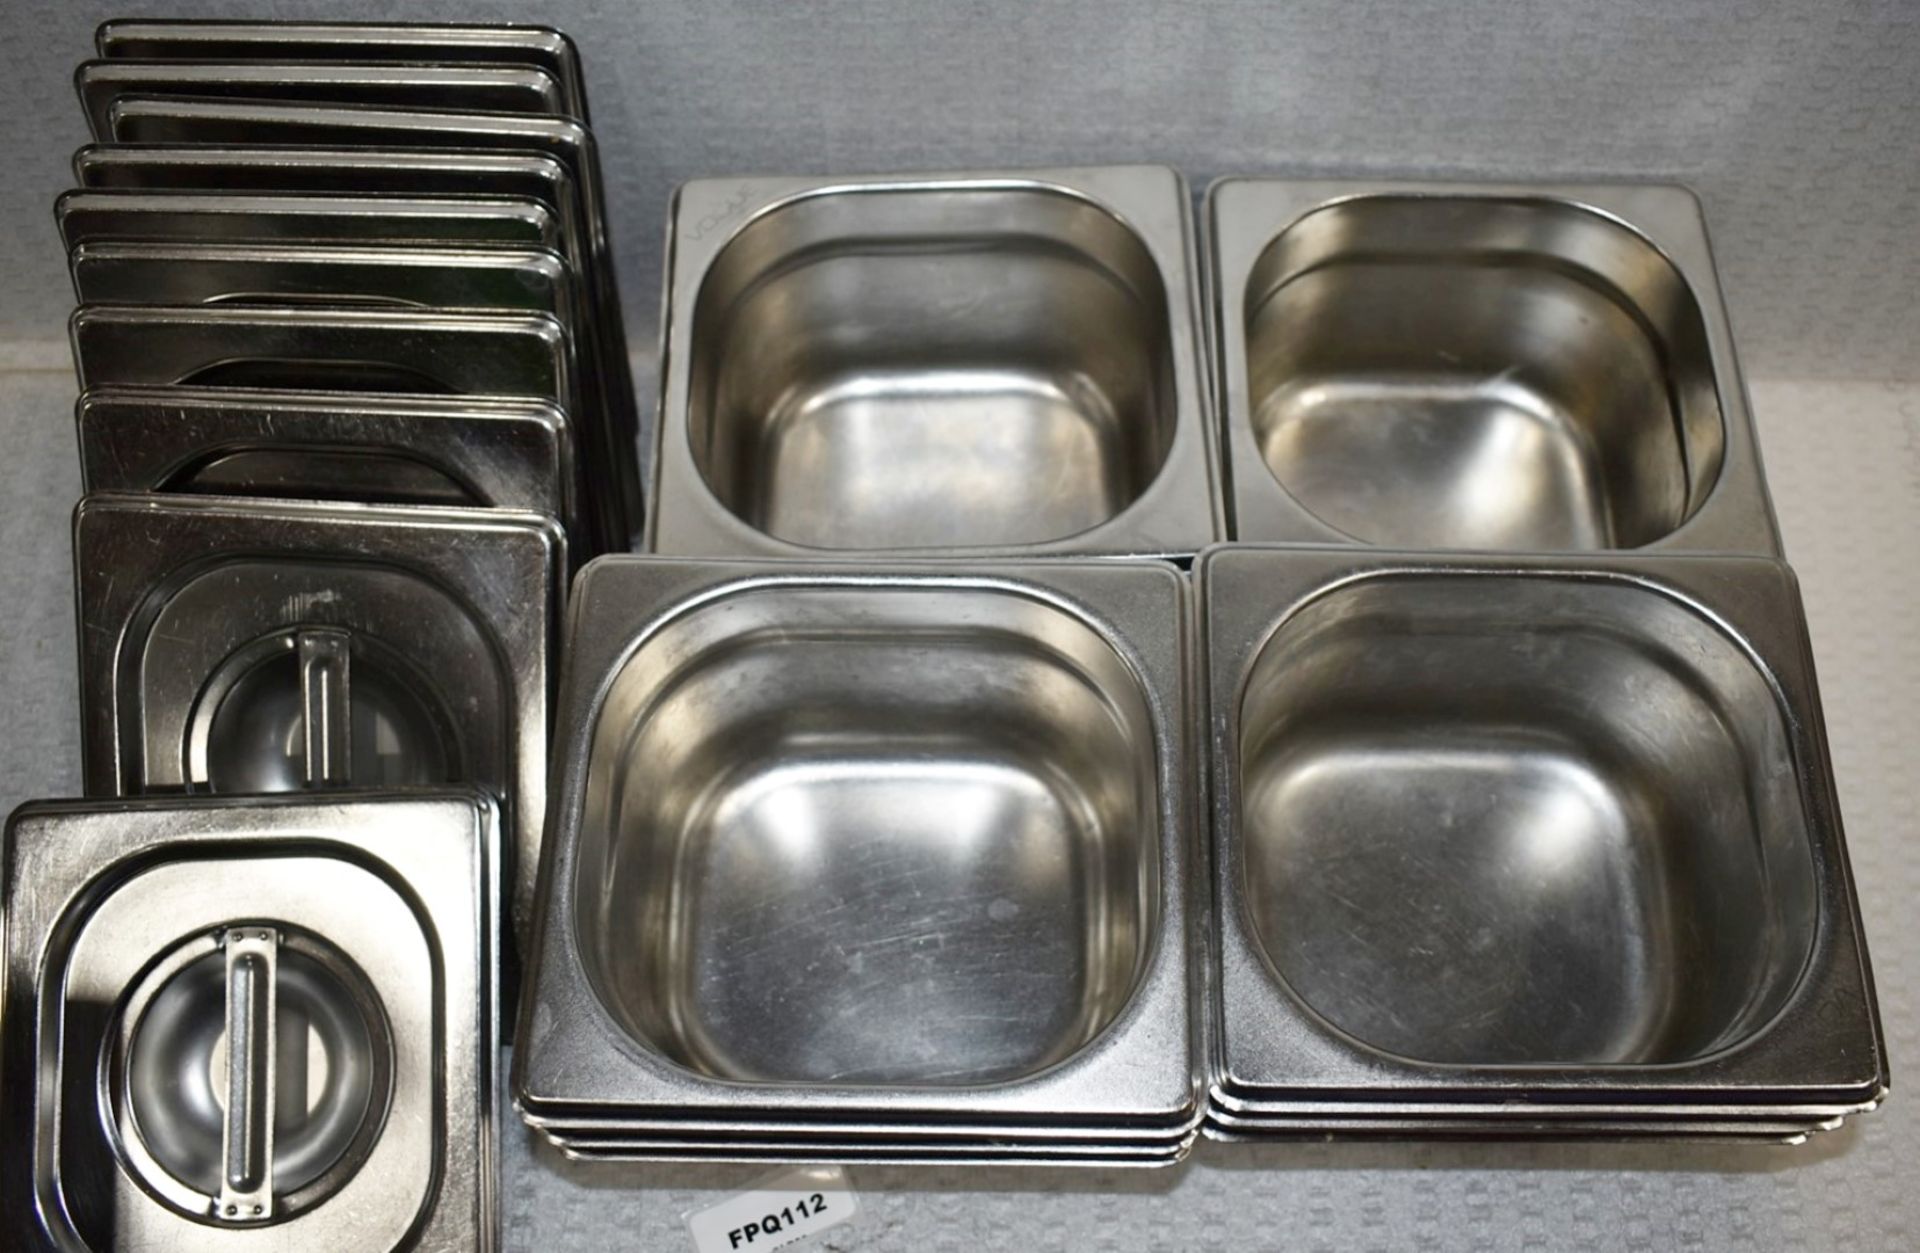 10 x Vogue Stainless Steel 1/6 Gastronorm Pans With Lids - Size: H10 x W16 x L17 cms - Recently - Image 3 of 4